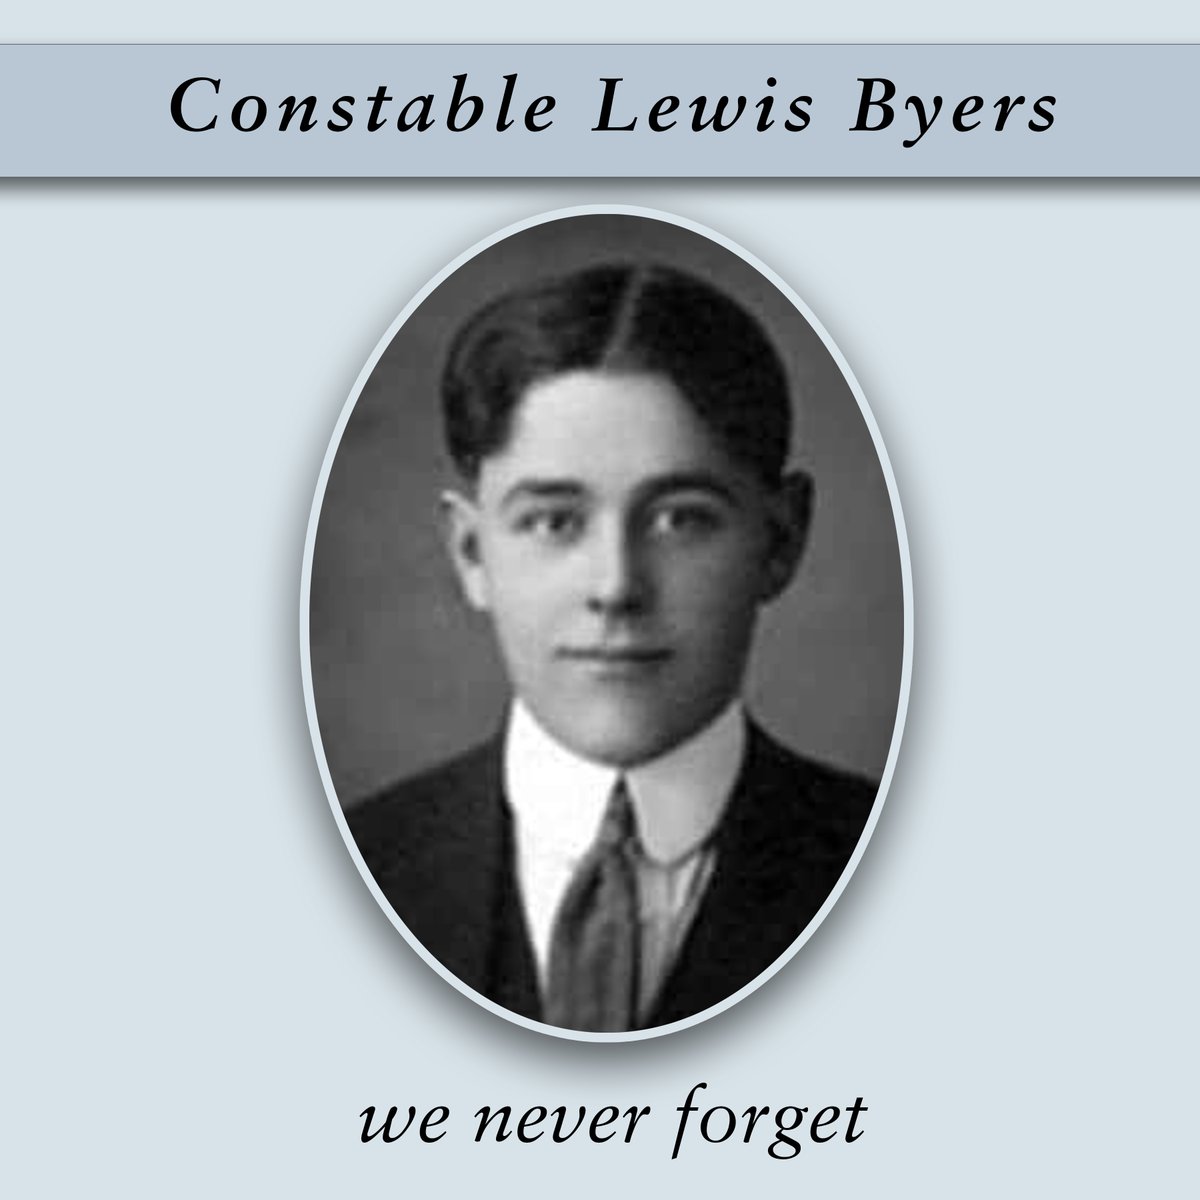 We #NeverForget #VPD Cst. Lewis Byers who was shot & killed 112 yrs ago today. He bravely responded to a complaint of a drunk & belligerent male at a #LiquorStore at Powell & Hawks who was brandishing a .38 #revolver @VancouverPD #LODD #EOW @BCLEMemorial @CPPOM #VancouversFinest